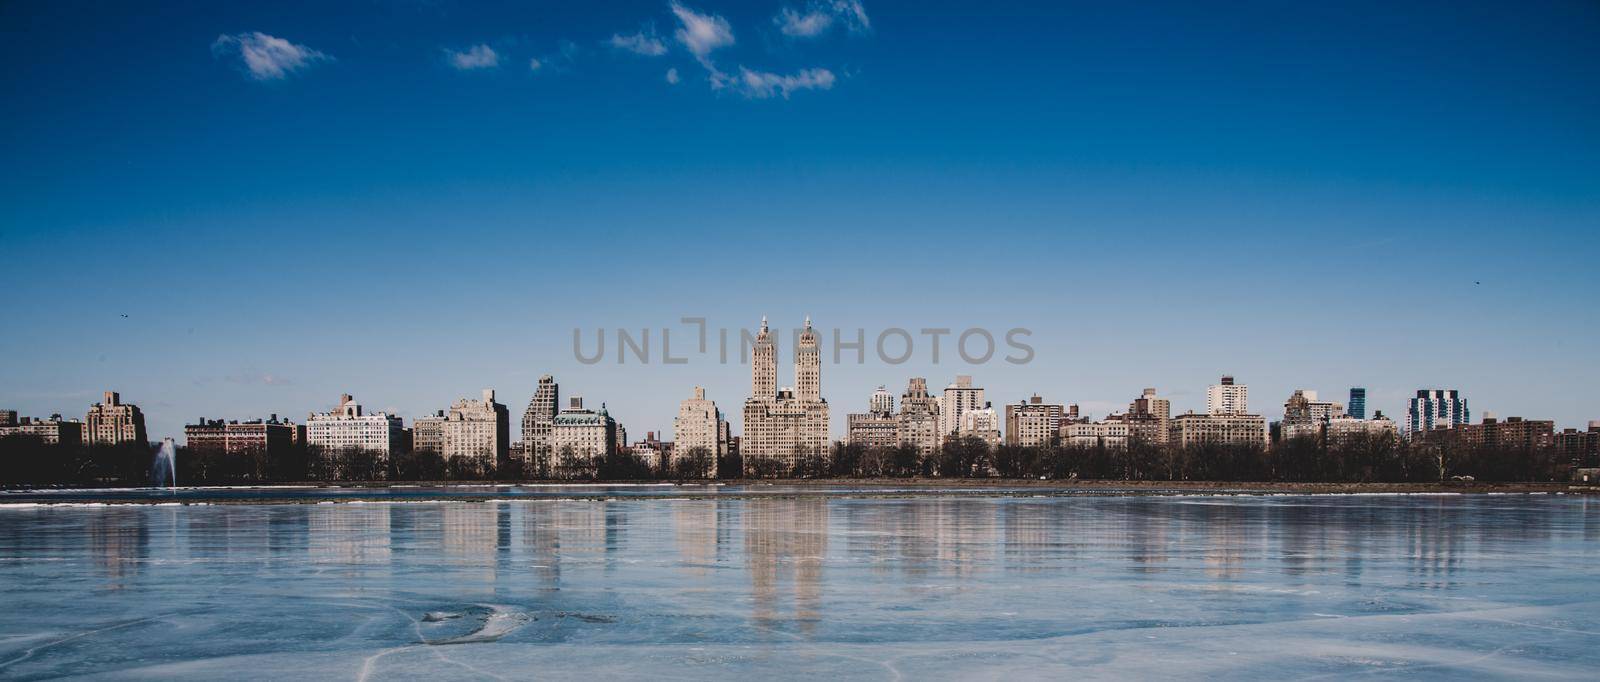 New York City, Central Park with Jacqueline Kennedy Onassis Reservoir. by kasto